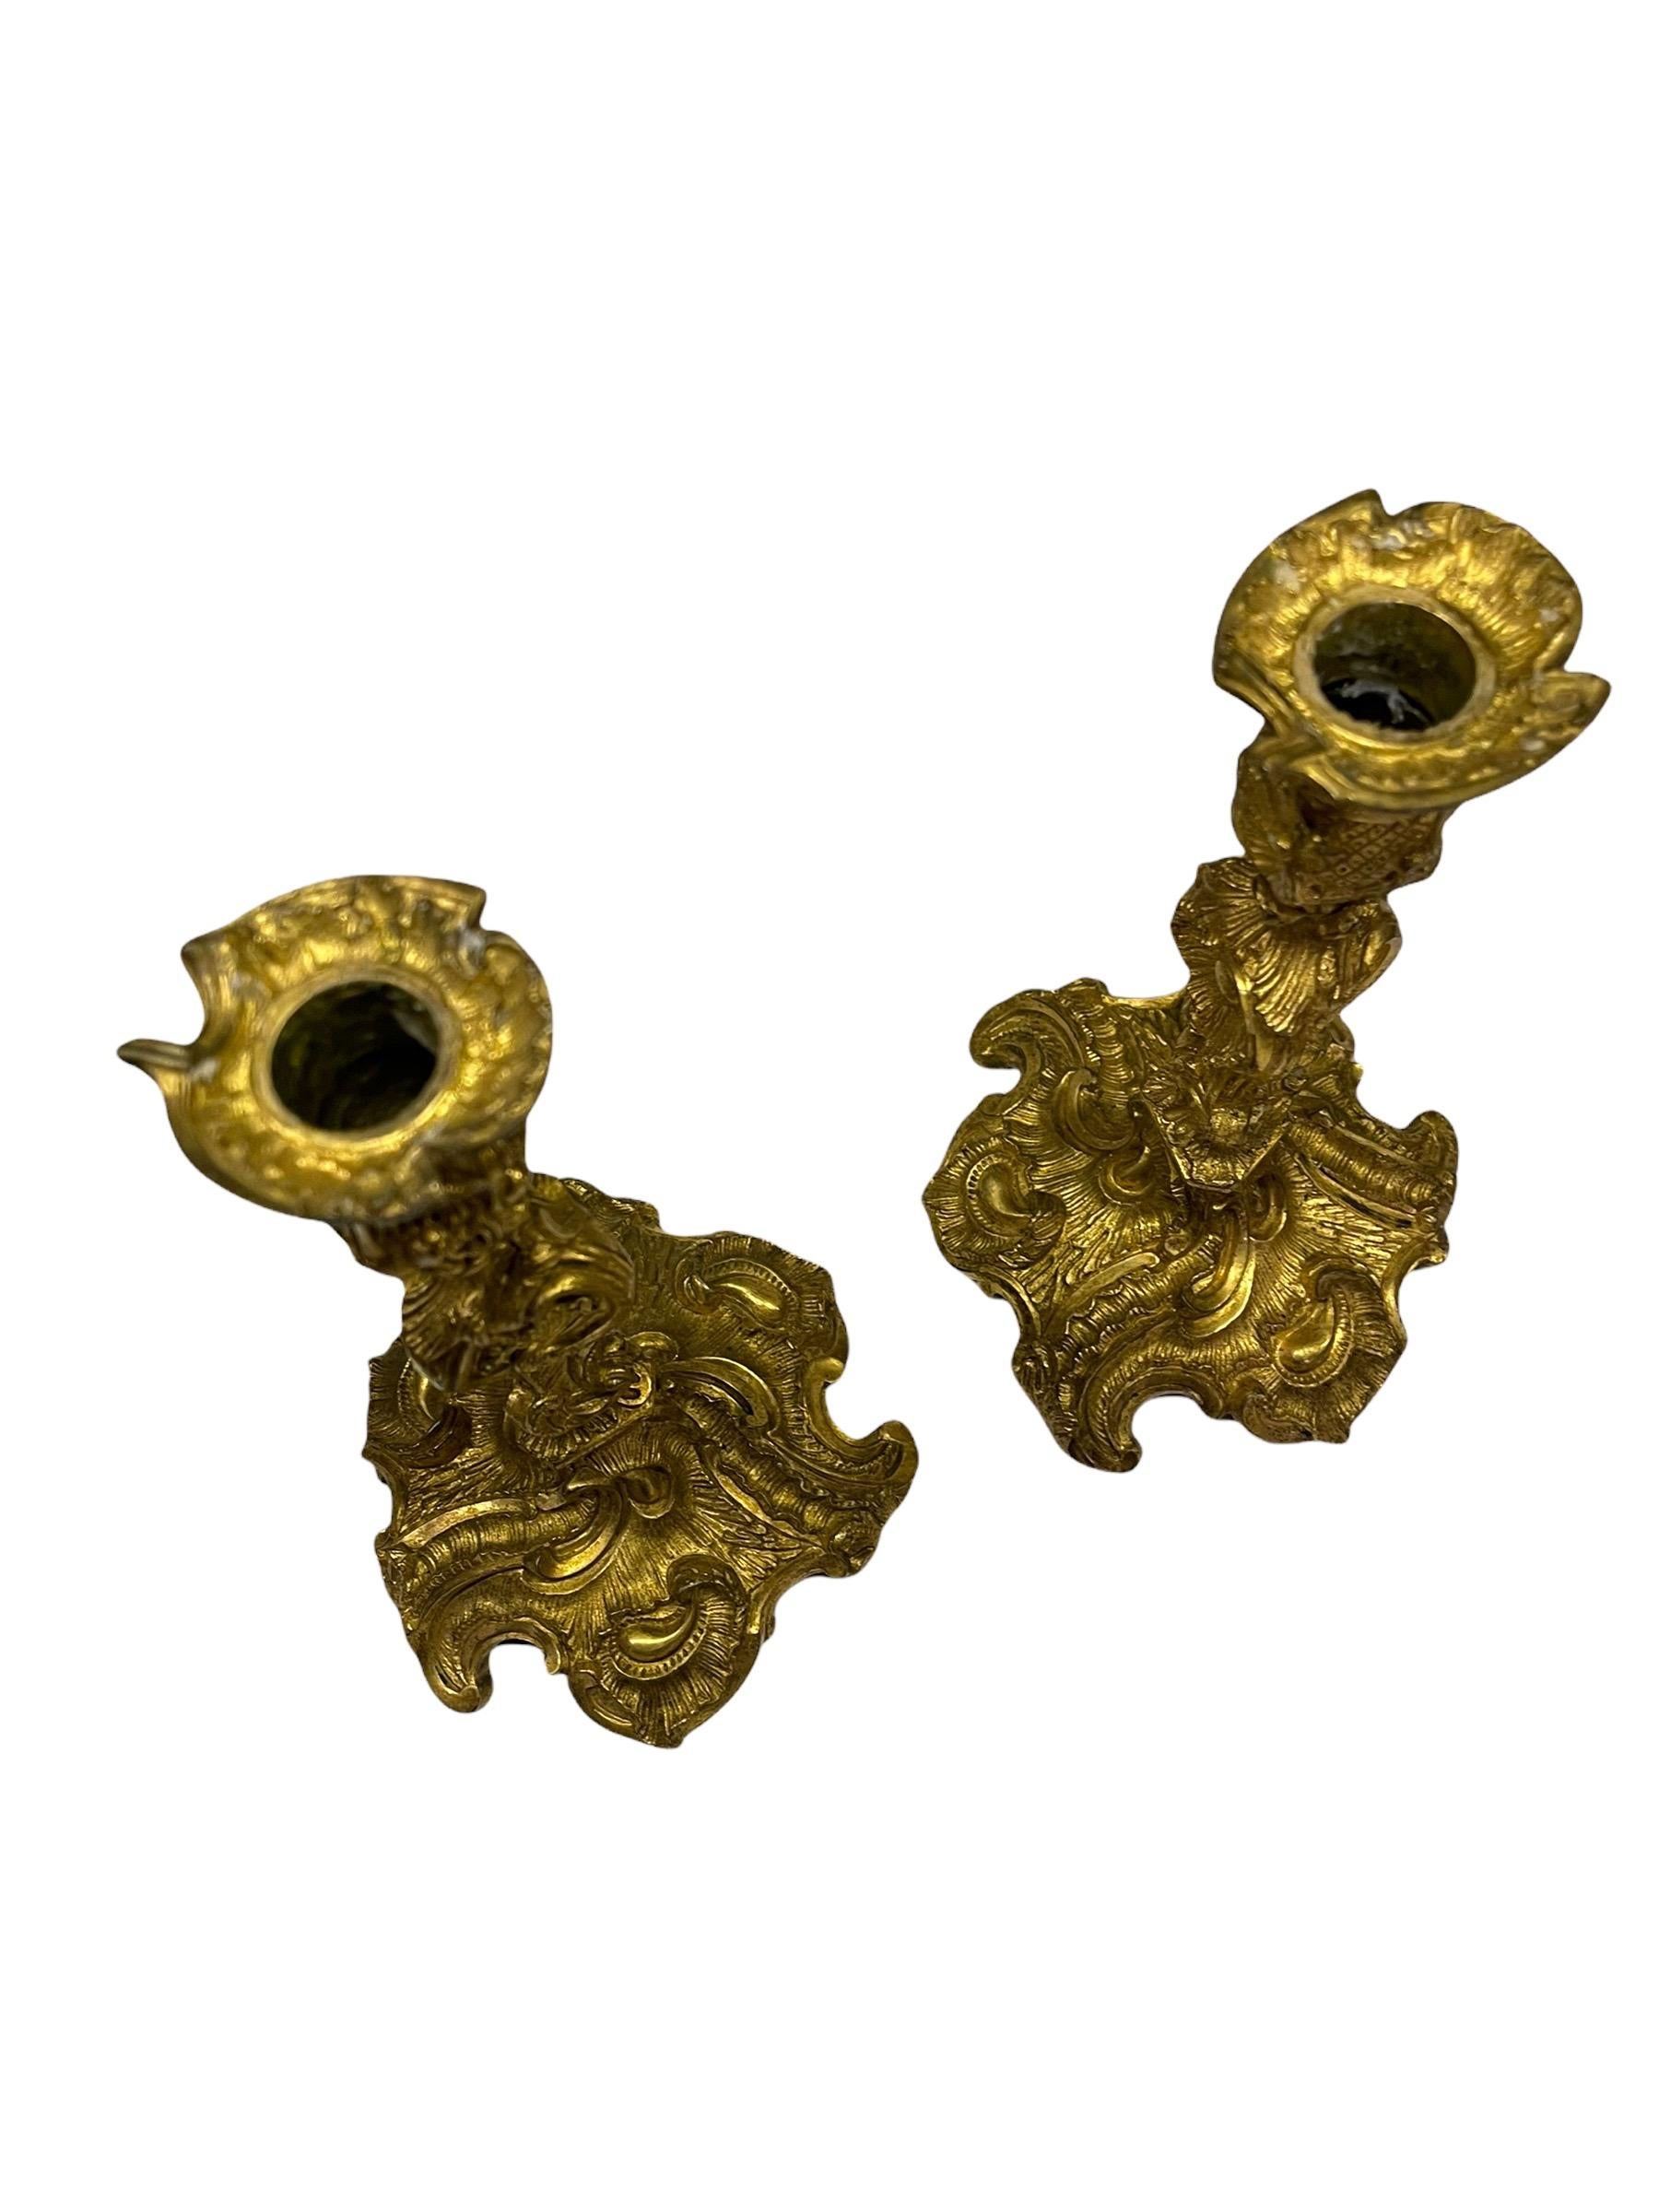 A Pair of French 18th Century Bronze Gold Gilt Candlesticks 3